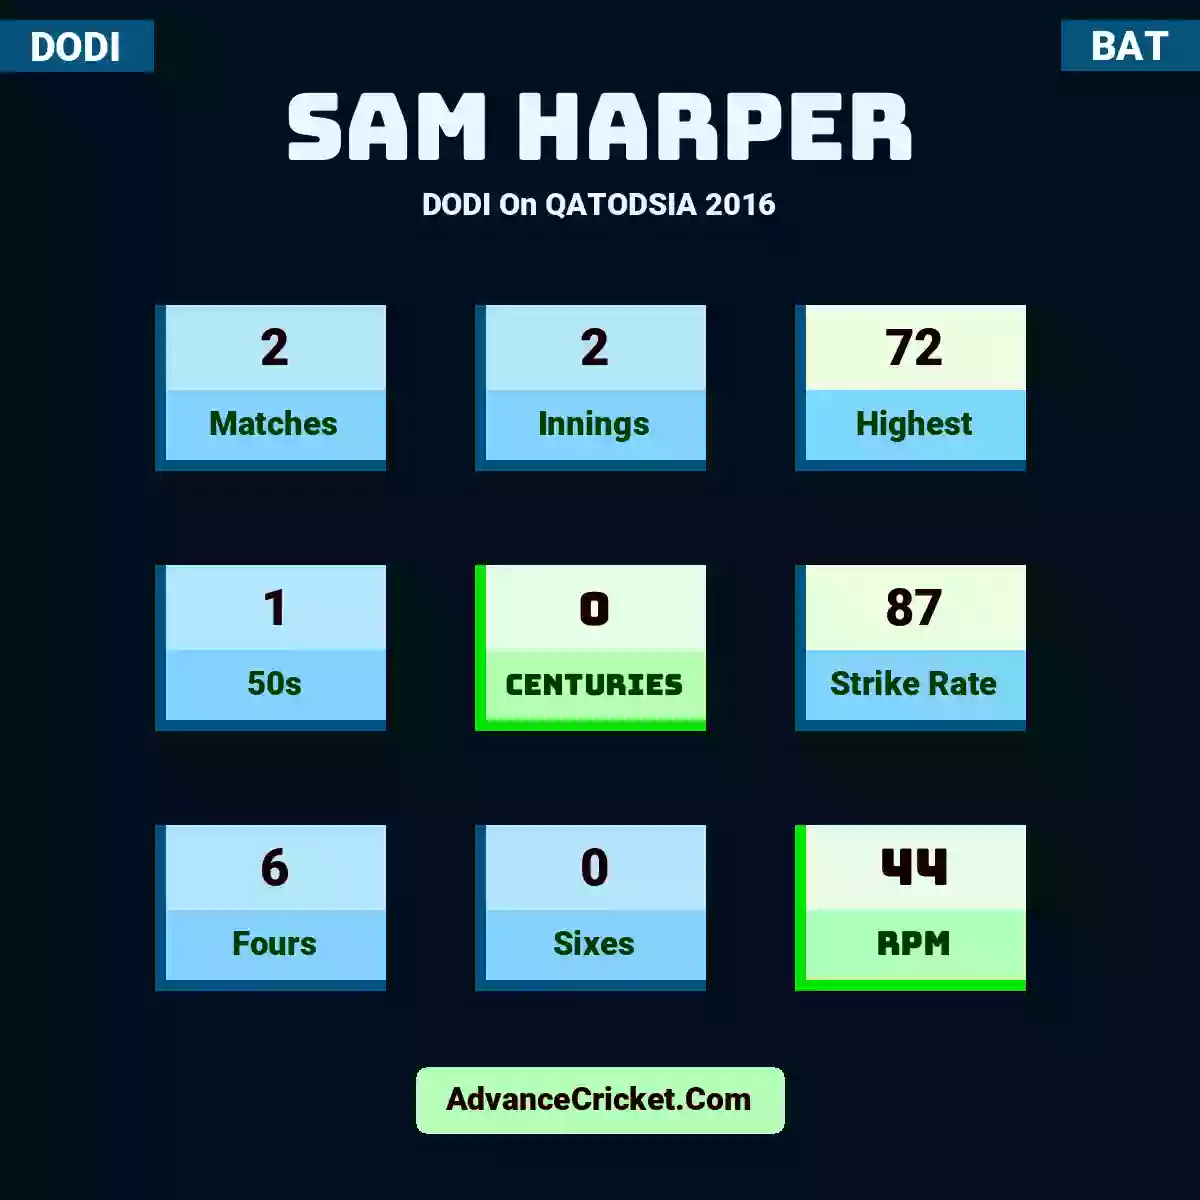 Sam Harper DODI  On QATODSIA 2016, Sam Harper played 2 matches, scored 72 runs as highest, 1 half-centuries, and 0 centuries, with a strike rate of 87. S.Harper hit 6 fours and 0 sixes, with an RPM of 44.